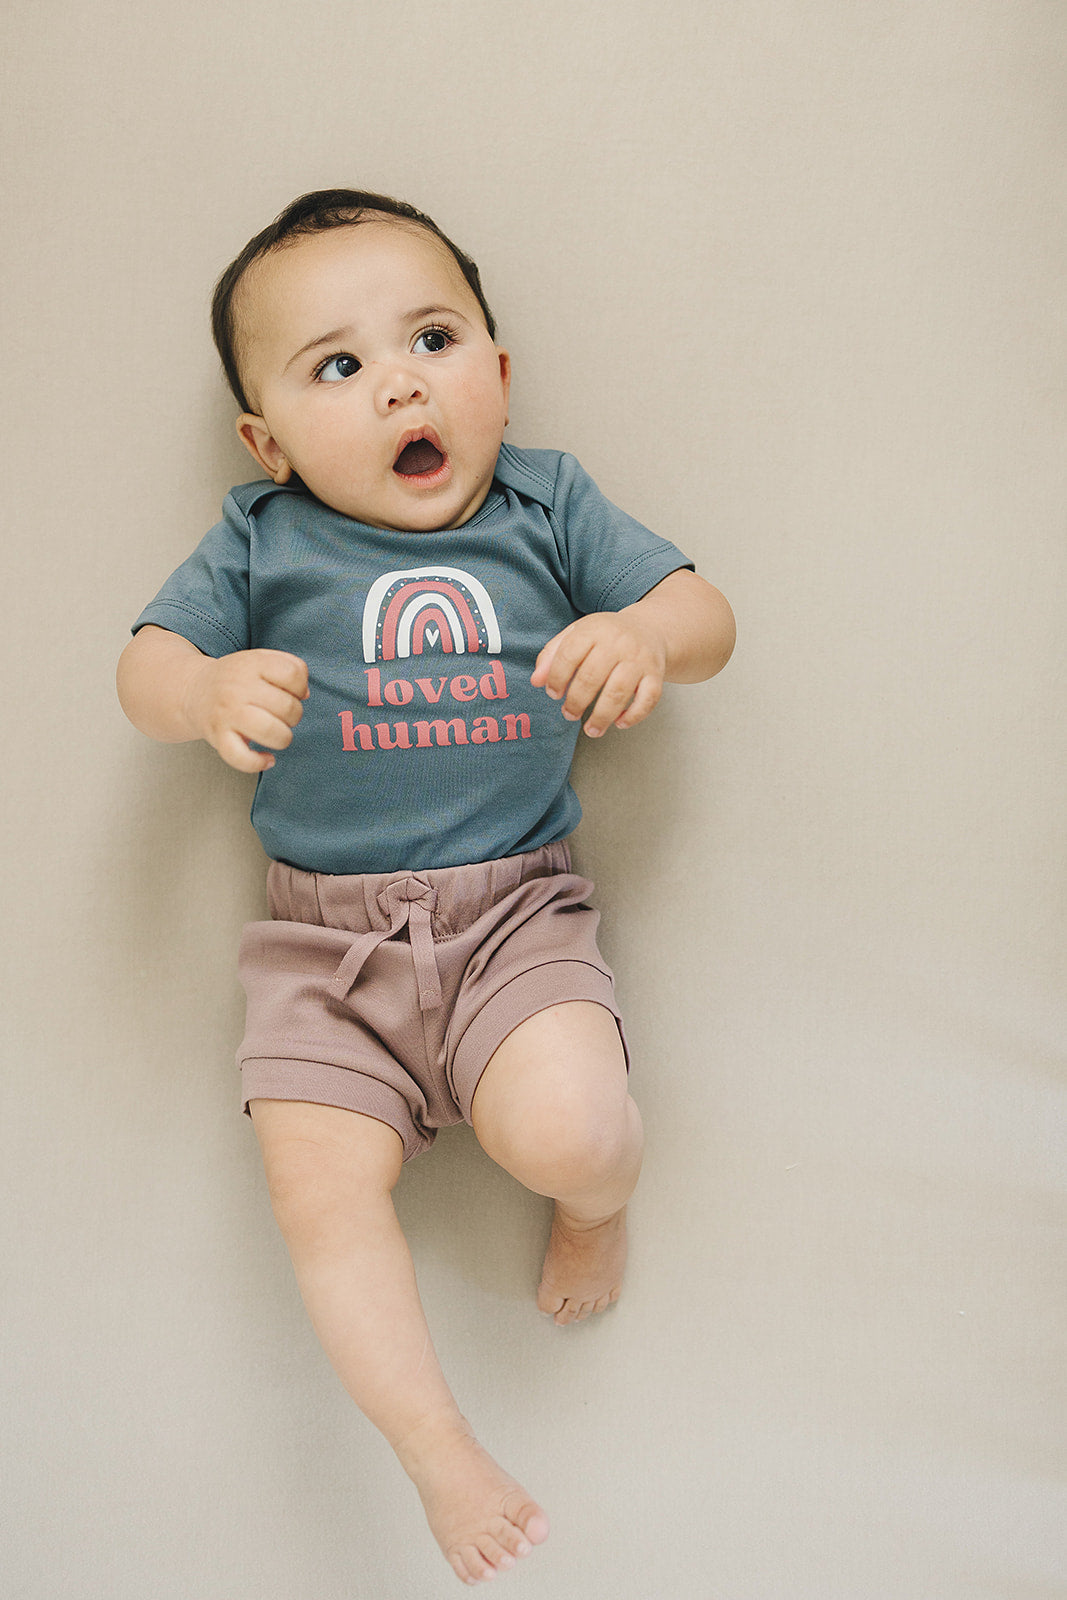 Adorable baby in a slate grey 'loved human' rainbow onesie with dusty rose shorts, lying on a beige background, looking surprised and delighted